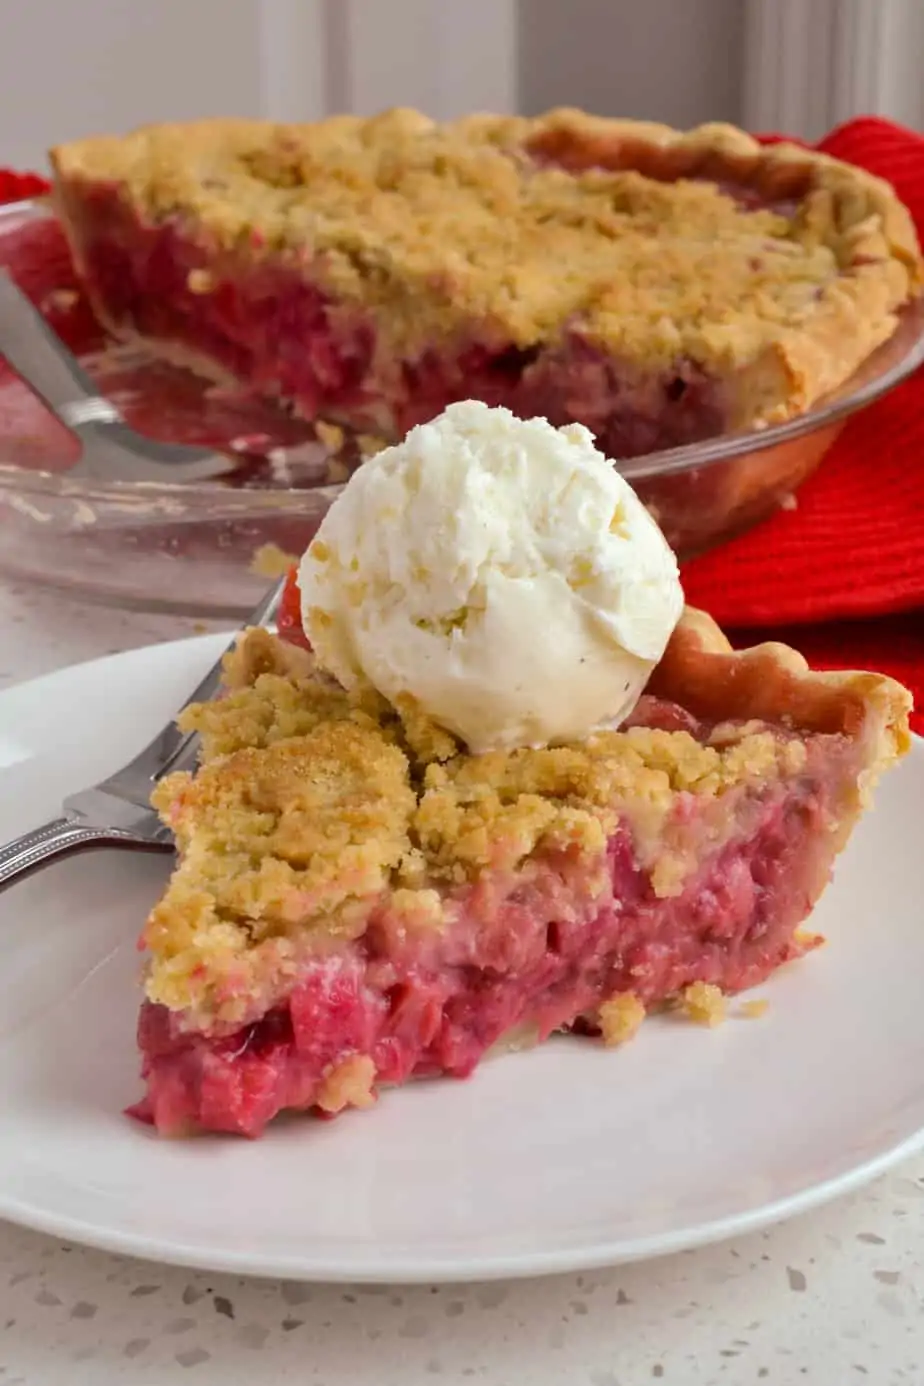 Serve this delicious fruit pie with a scoop of all natural vanilla ice cream. 